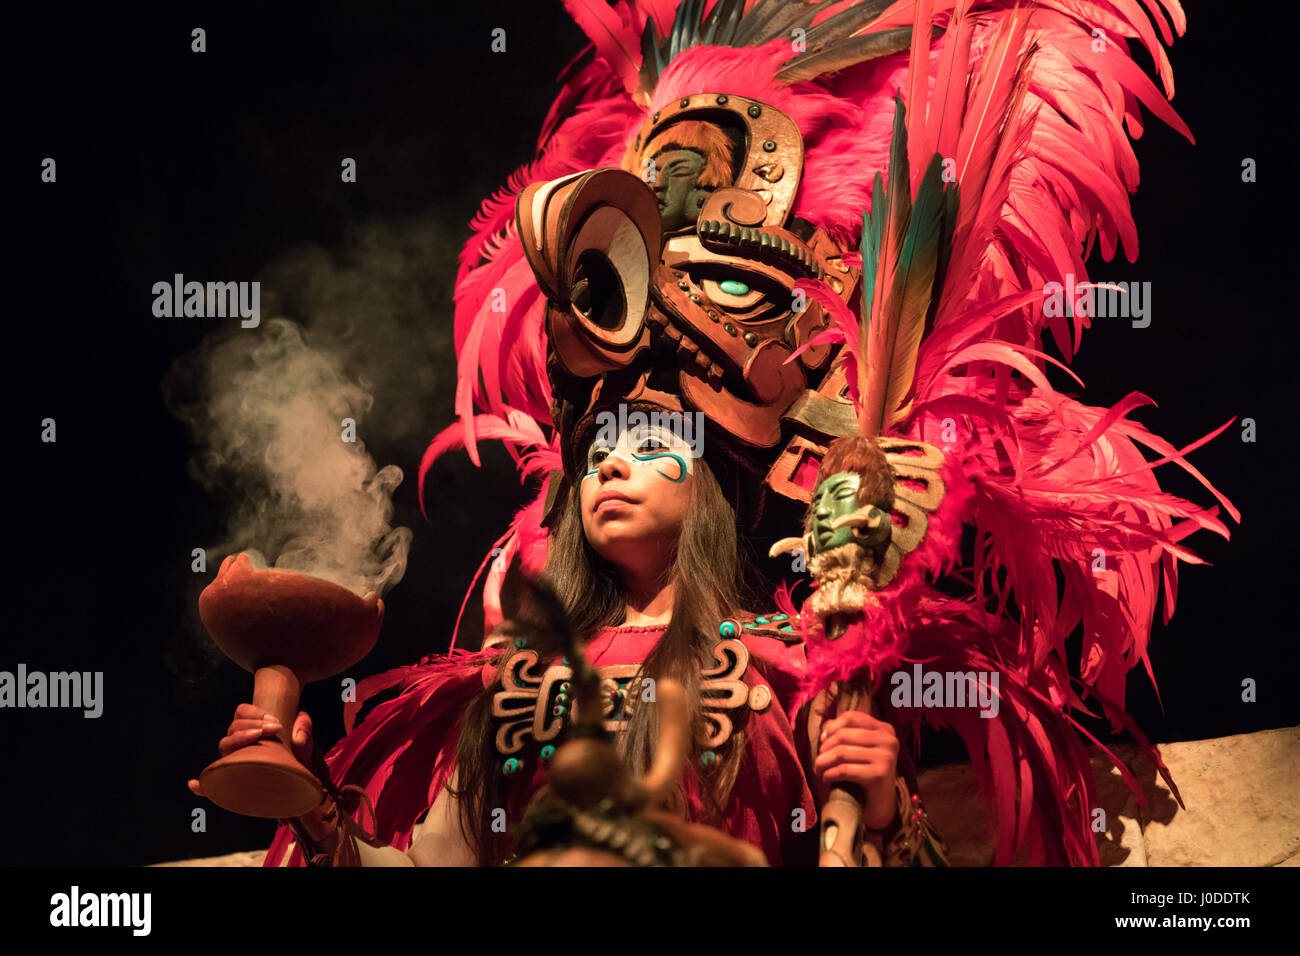 Cancun, Mexico - Mar 16, 2017: Young woman in a dramatic Mayan costume. Stock Photo